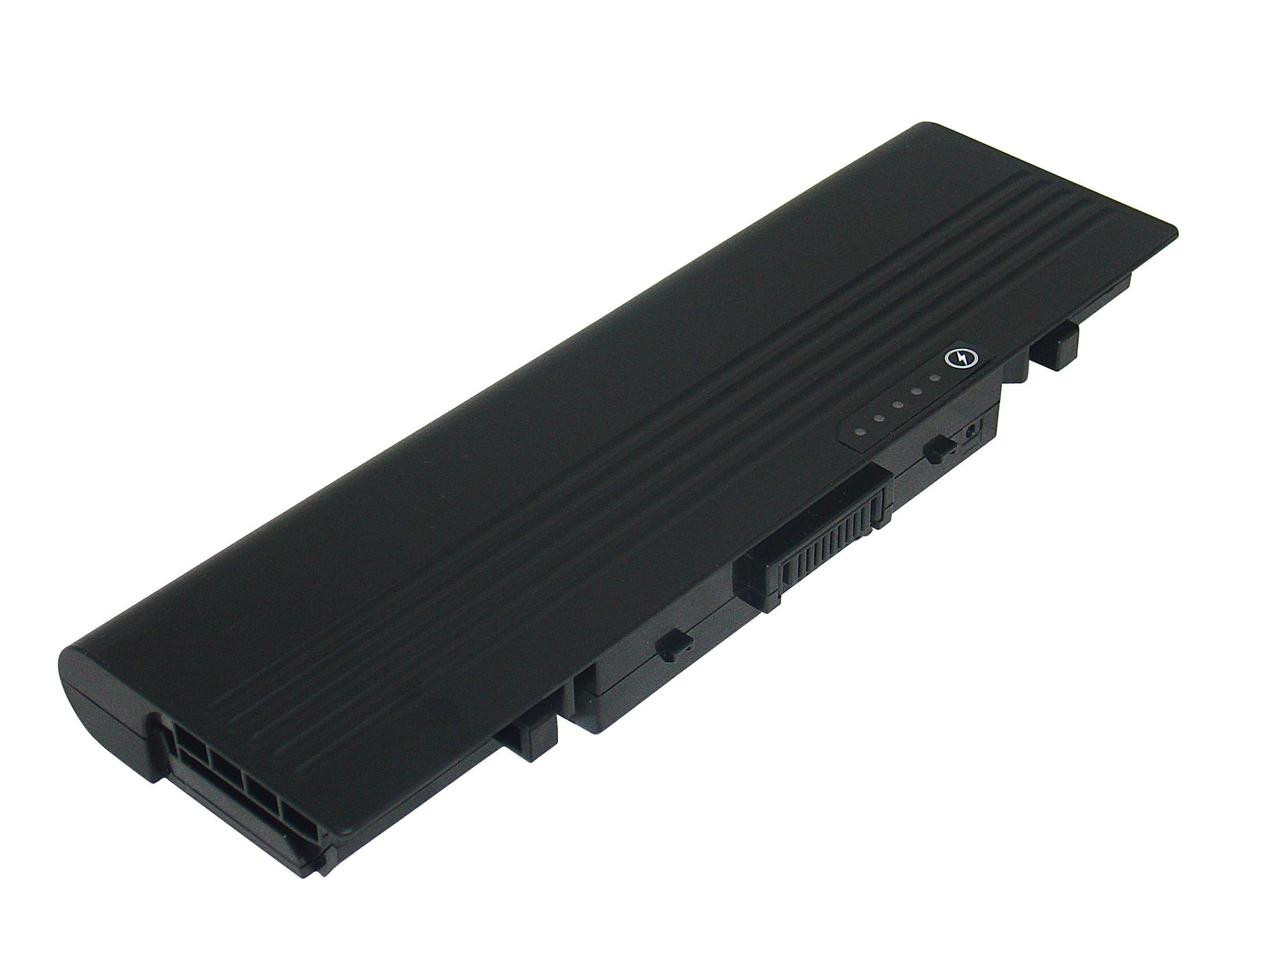 New Replacement 9 Cell Laptop Battery for Dell Inspiron 1520, 1720 & Vostro 1500, 1700